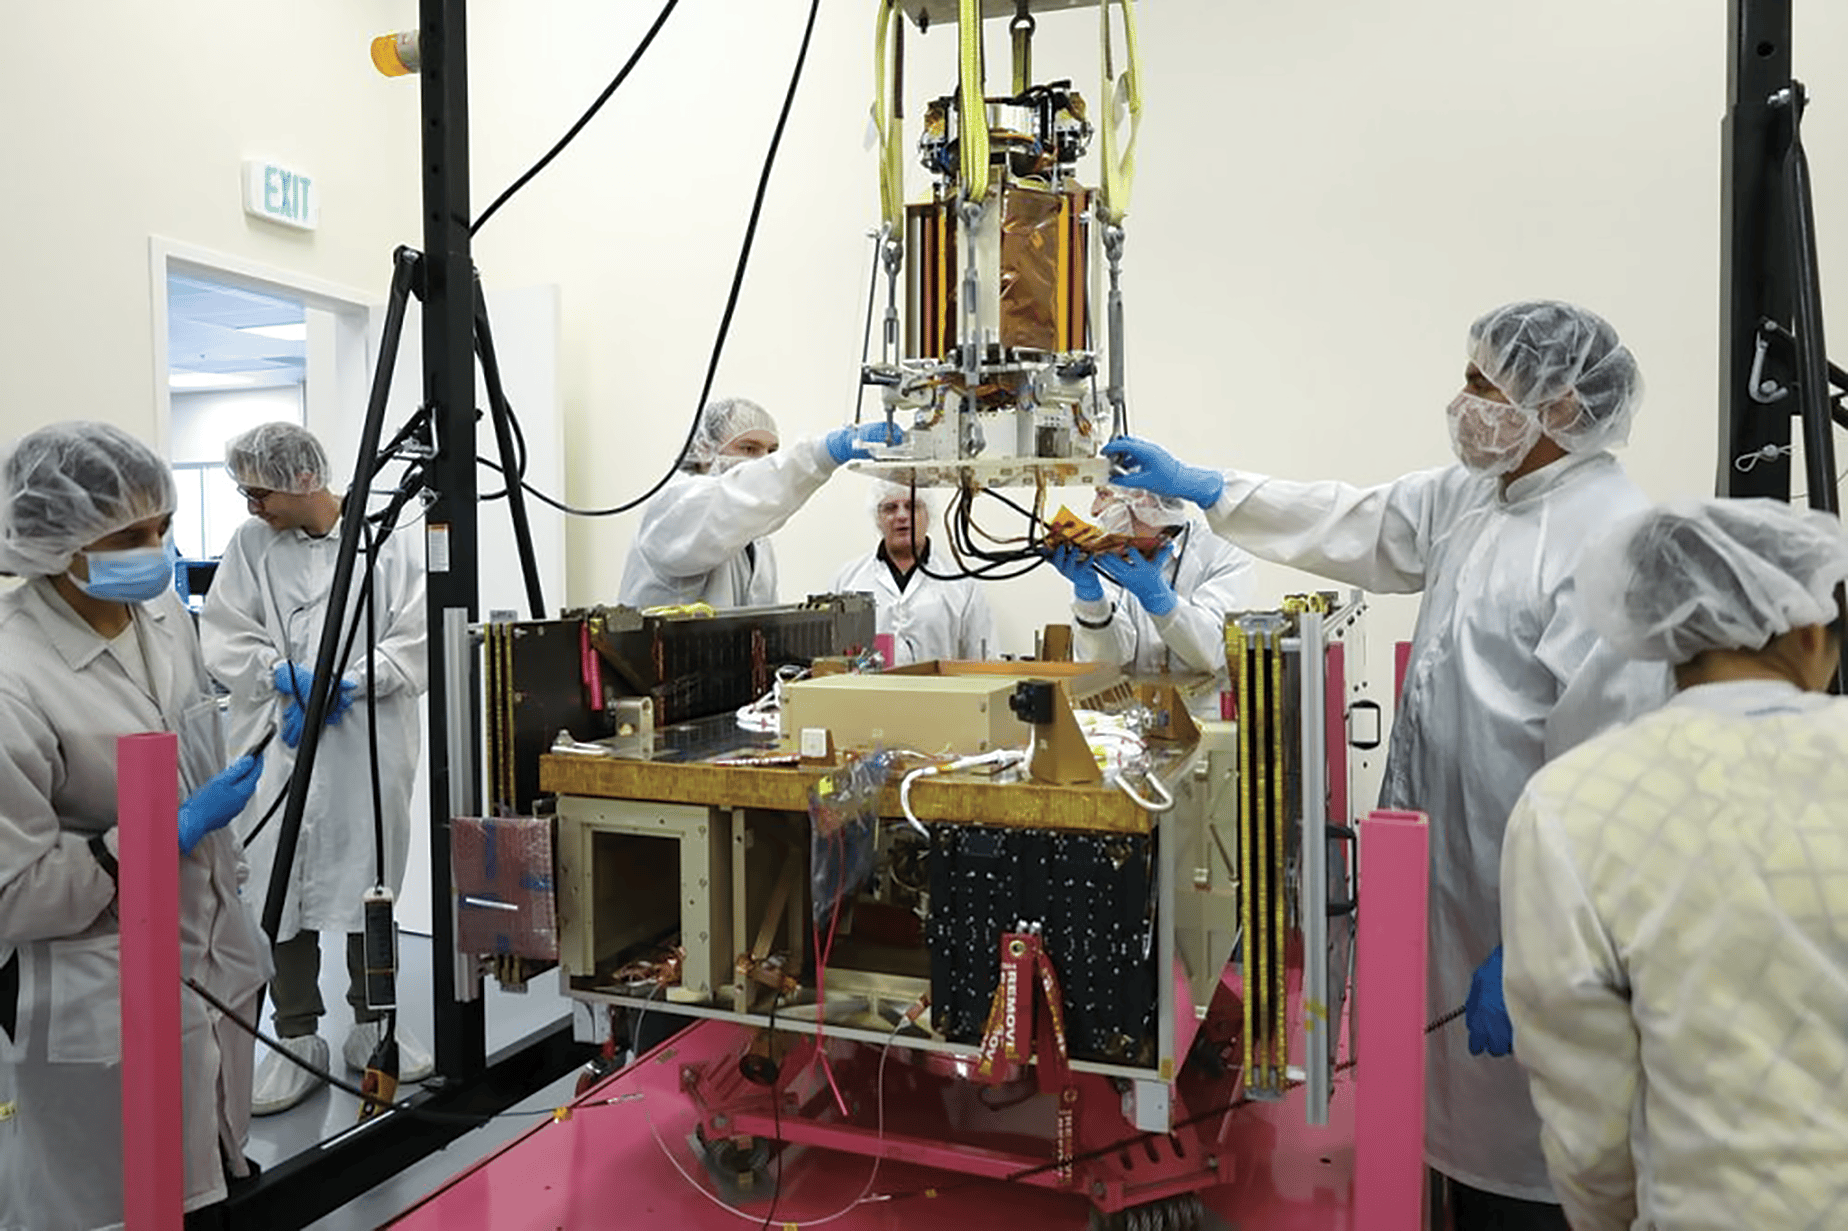 Engineers lower a portion of the Space Solar Power Demonstrator onto spacecraft